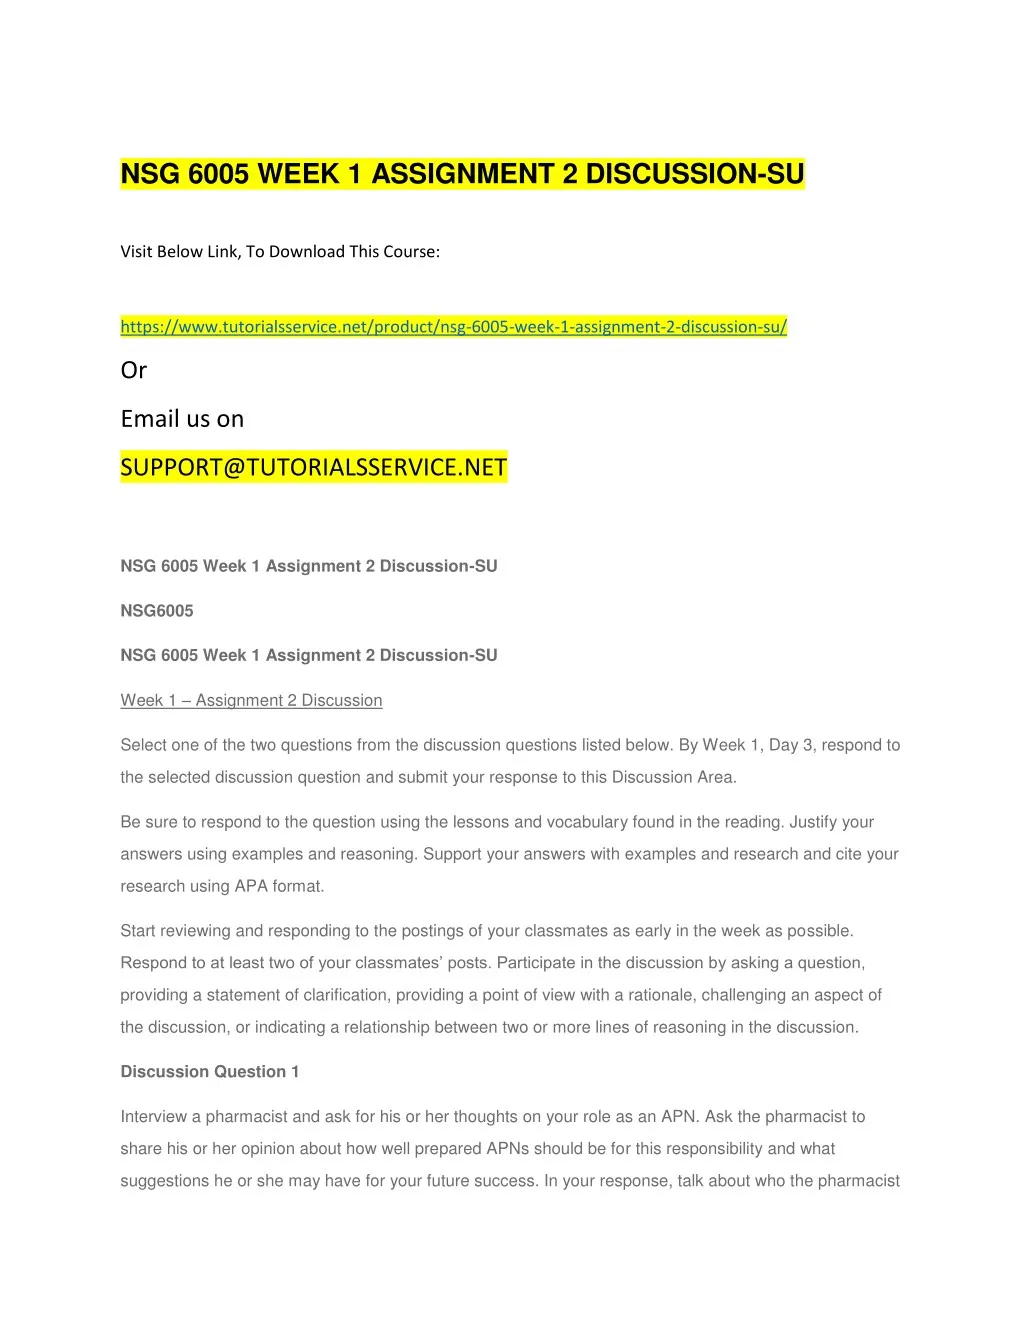 nsg 6005 week 1 assignment 2 discussion su